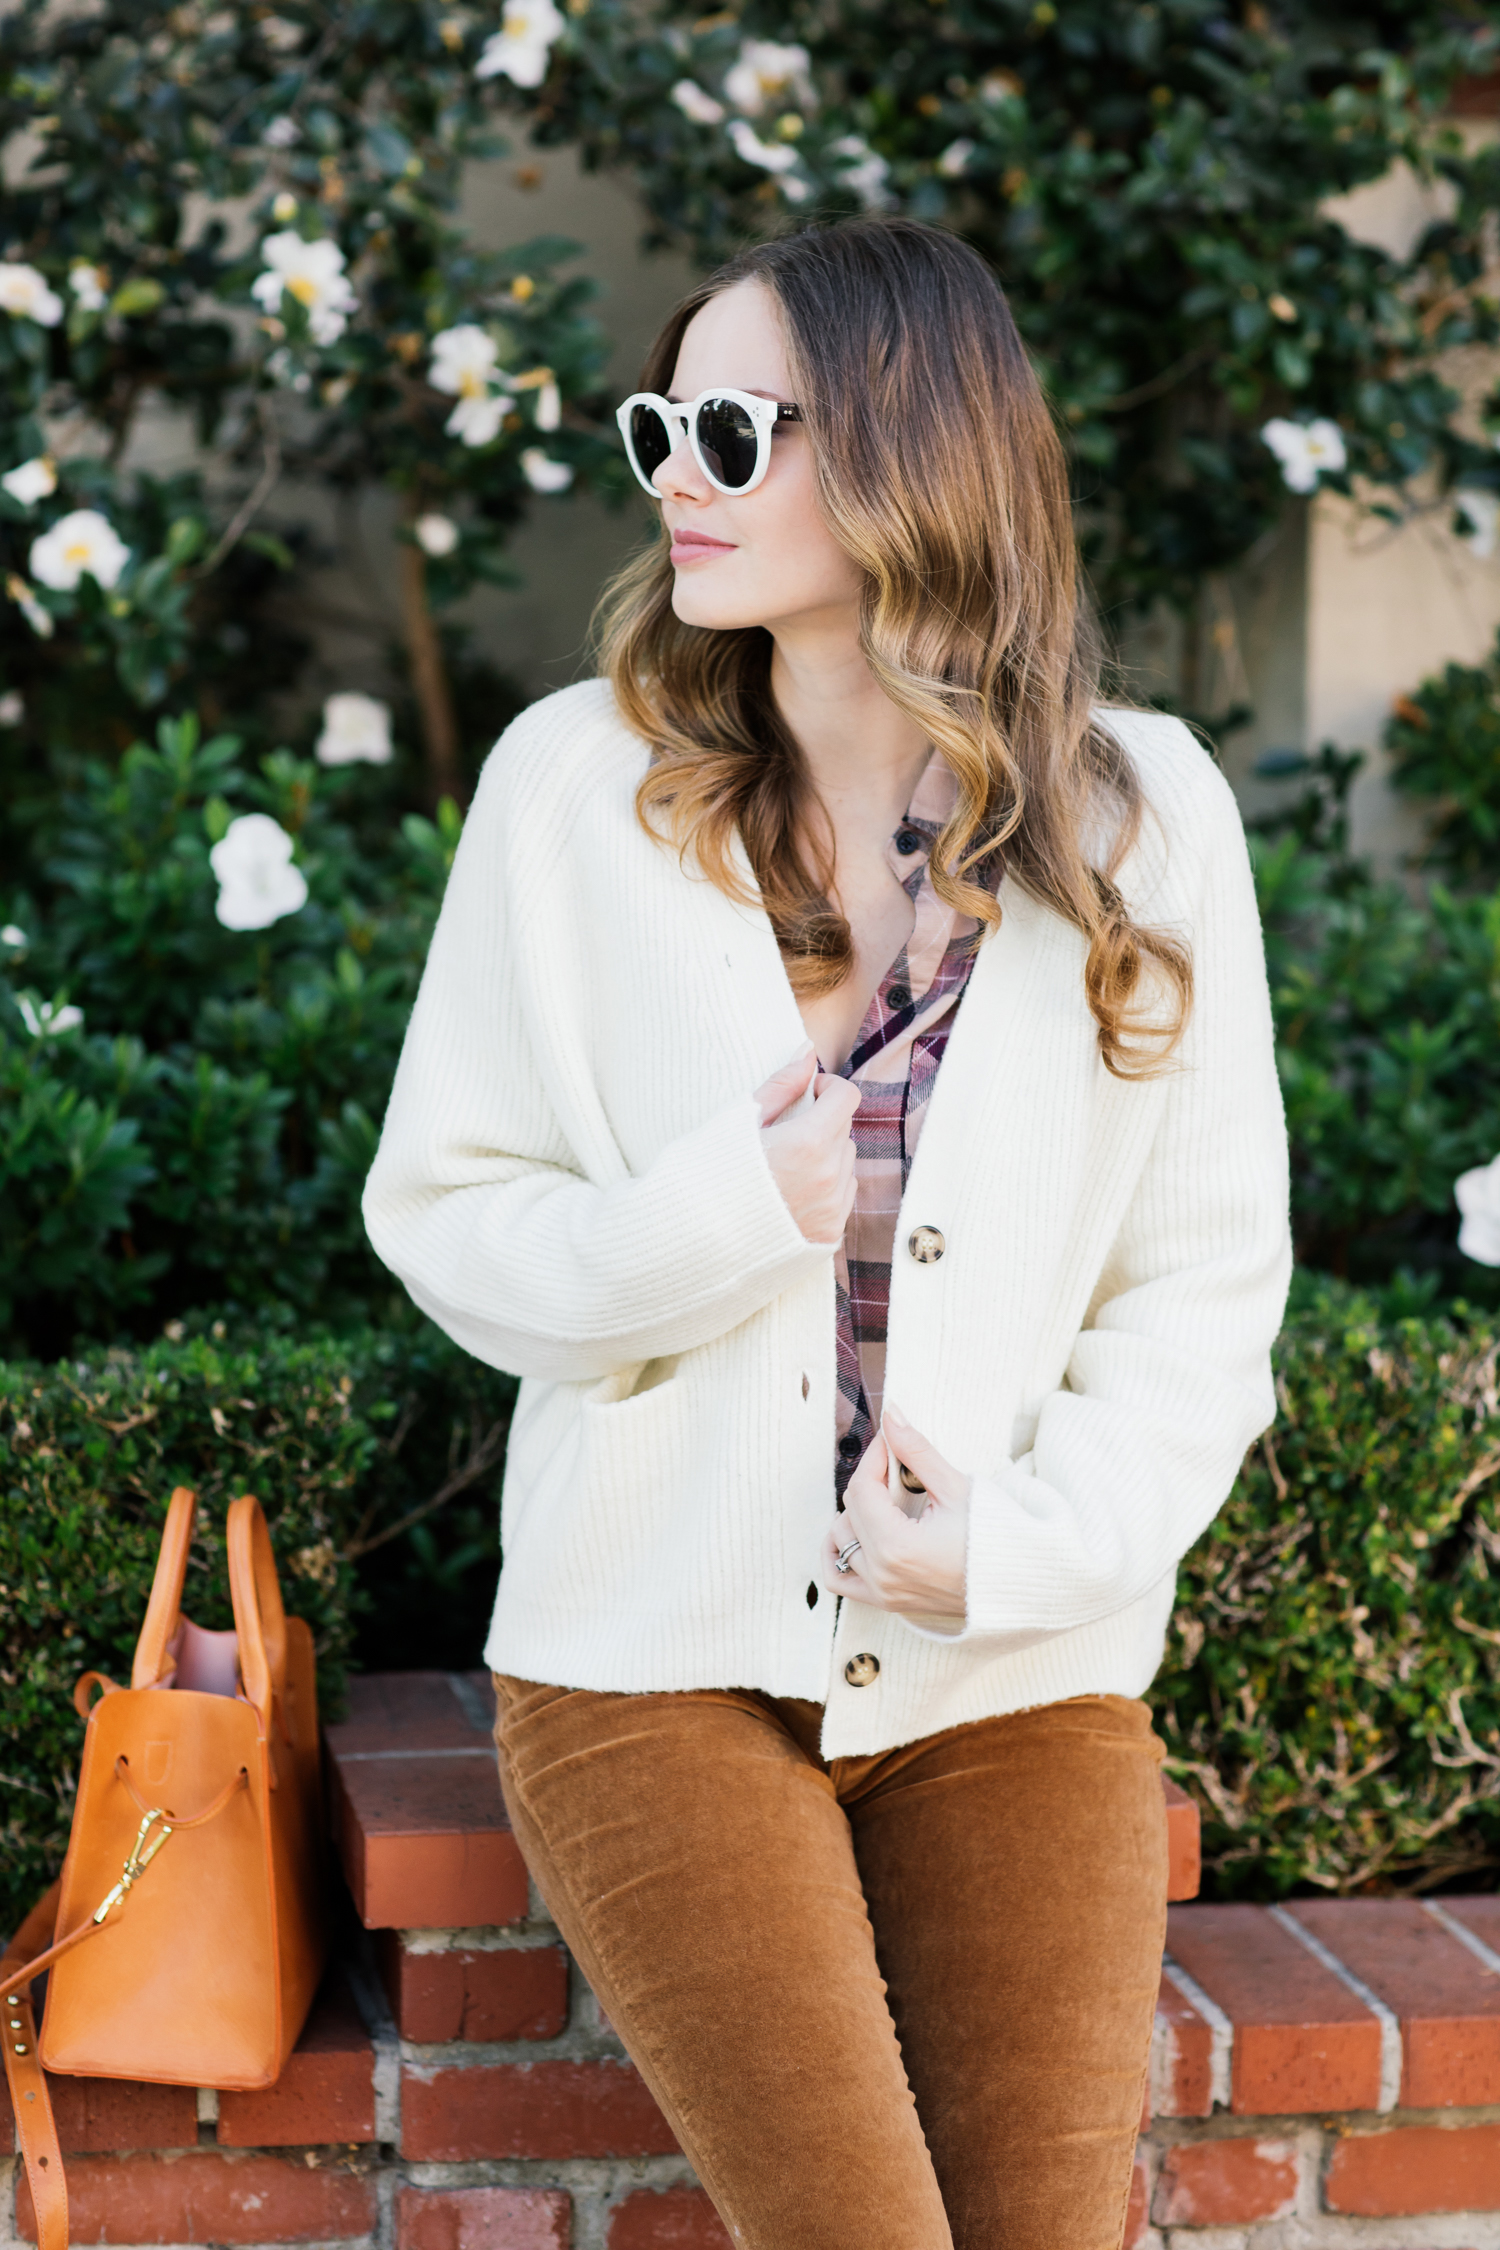 Alyssa Campanella of The A List blog wears Frame velvet jeans and Leith cardigan for the perfect fall outfit